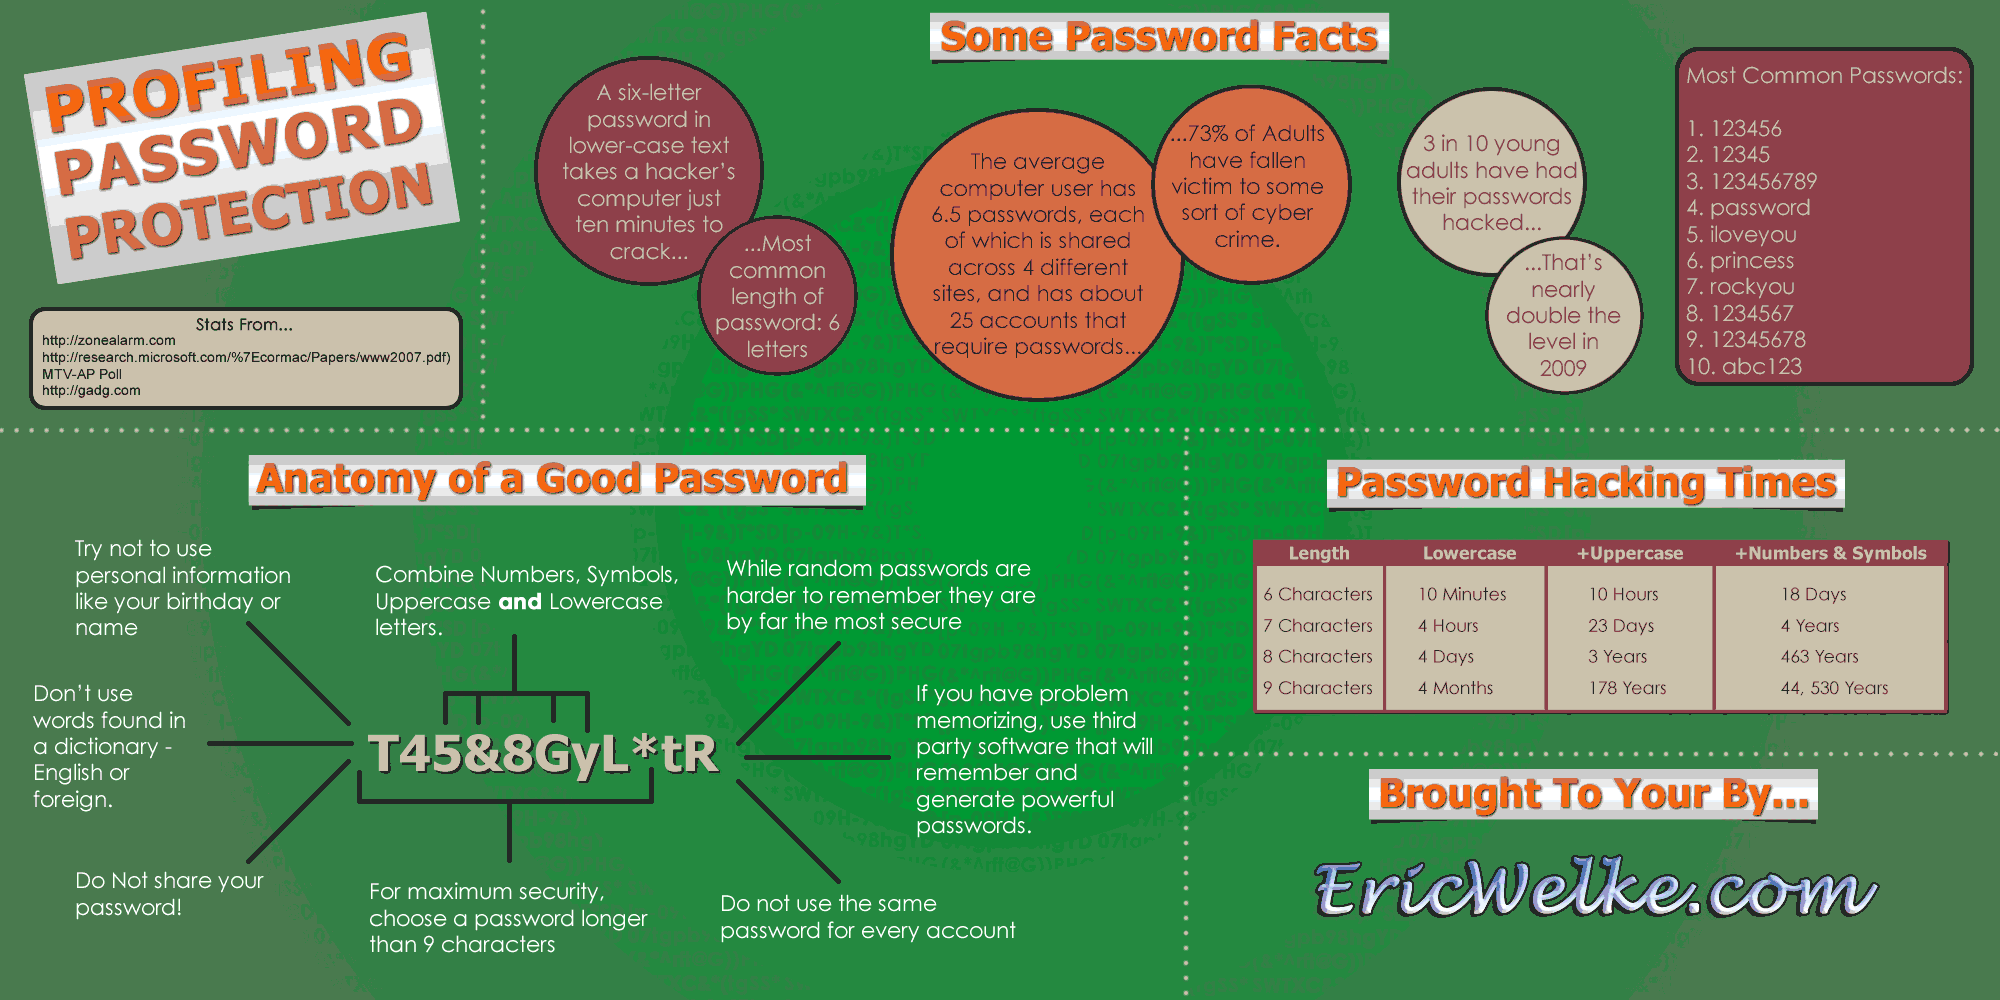 Web Security Tips in an Infographic